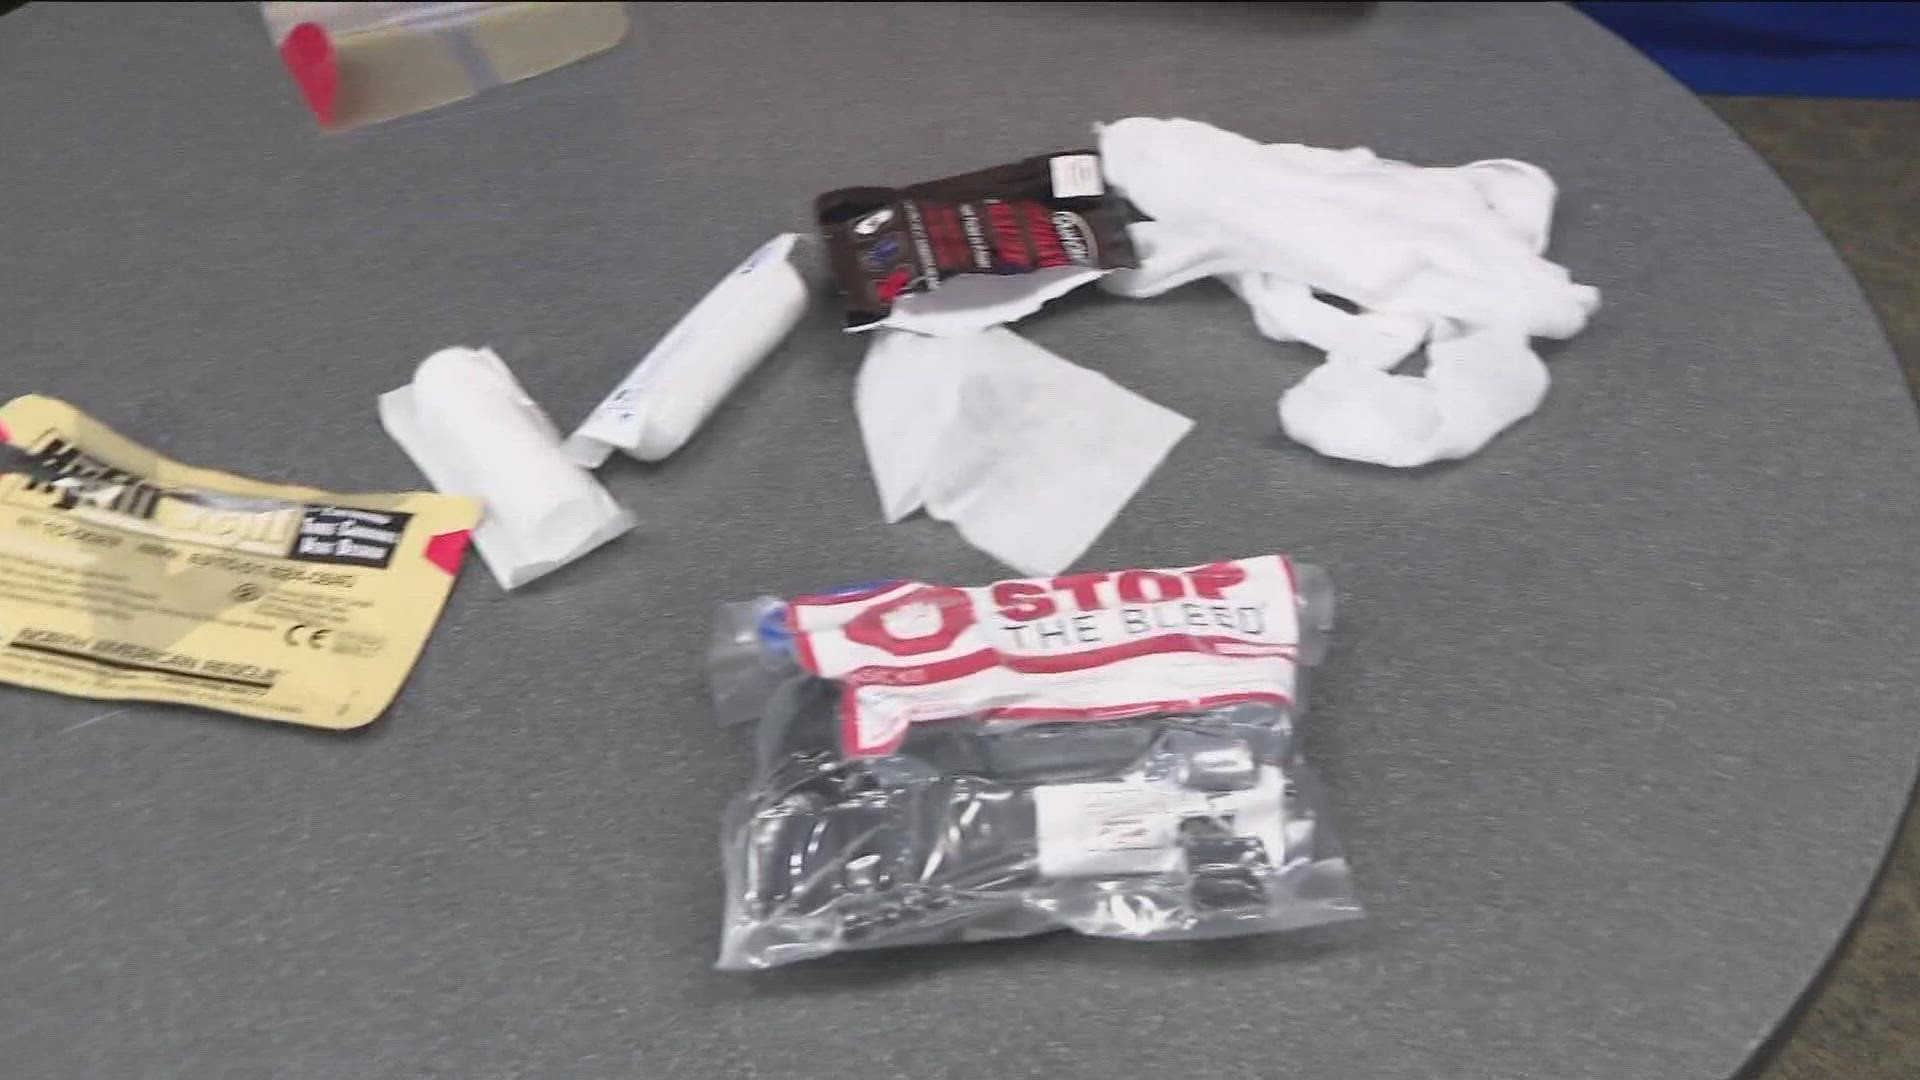 ATCEMS is offering a "Stop the Bleeding" training course to help people understand how to save someone's life from a gunshot wound.